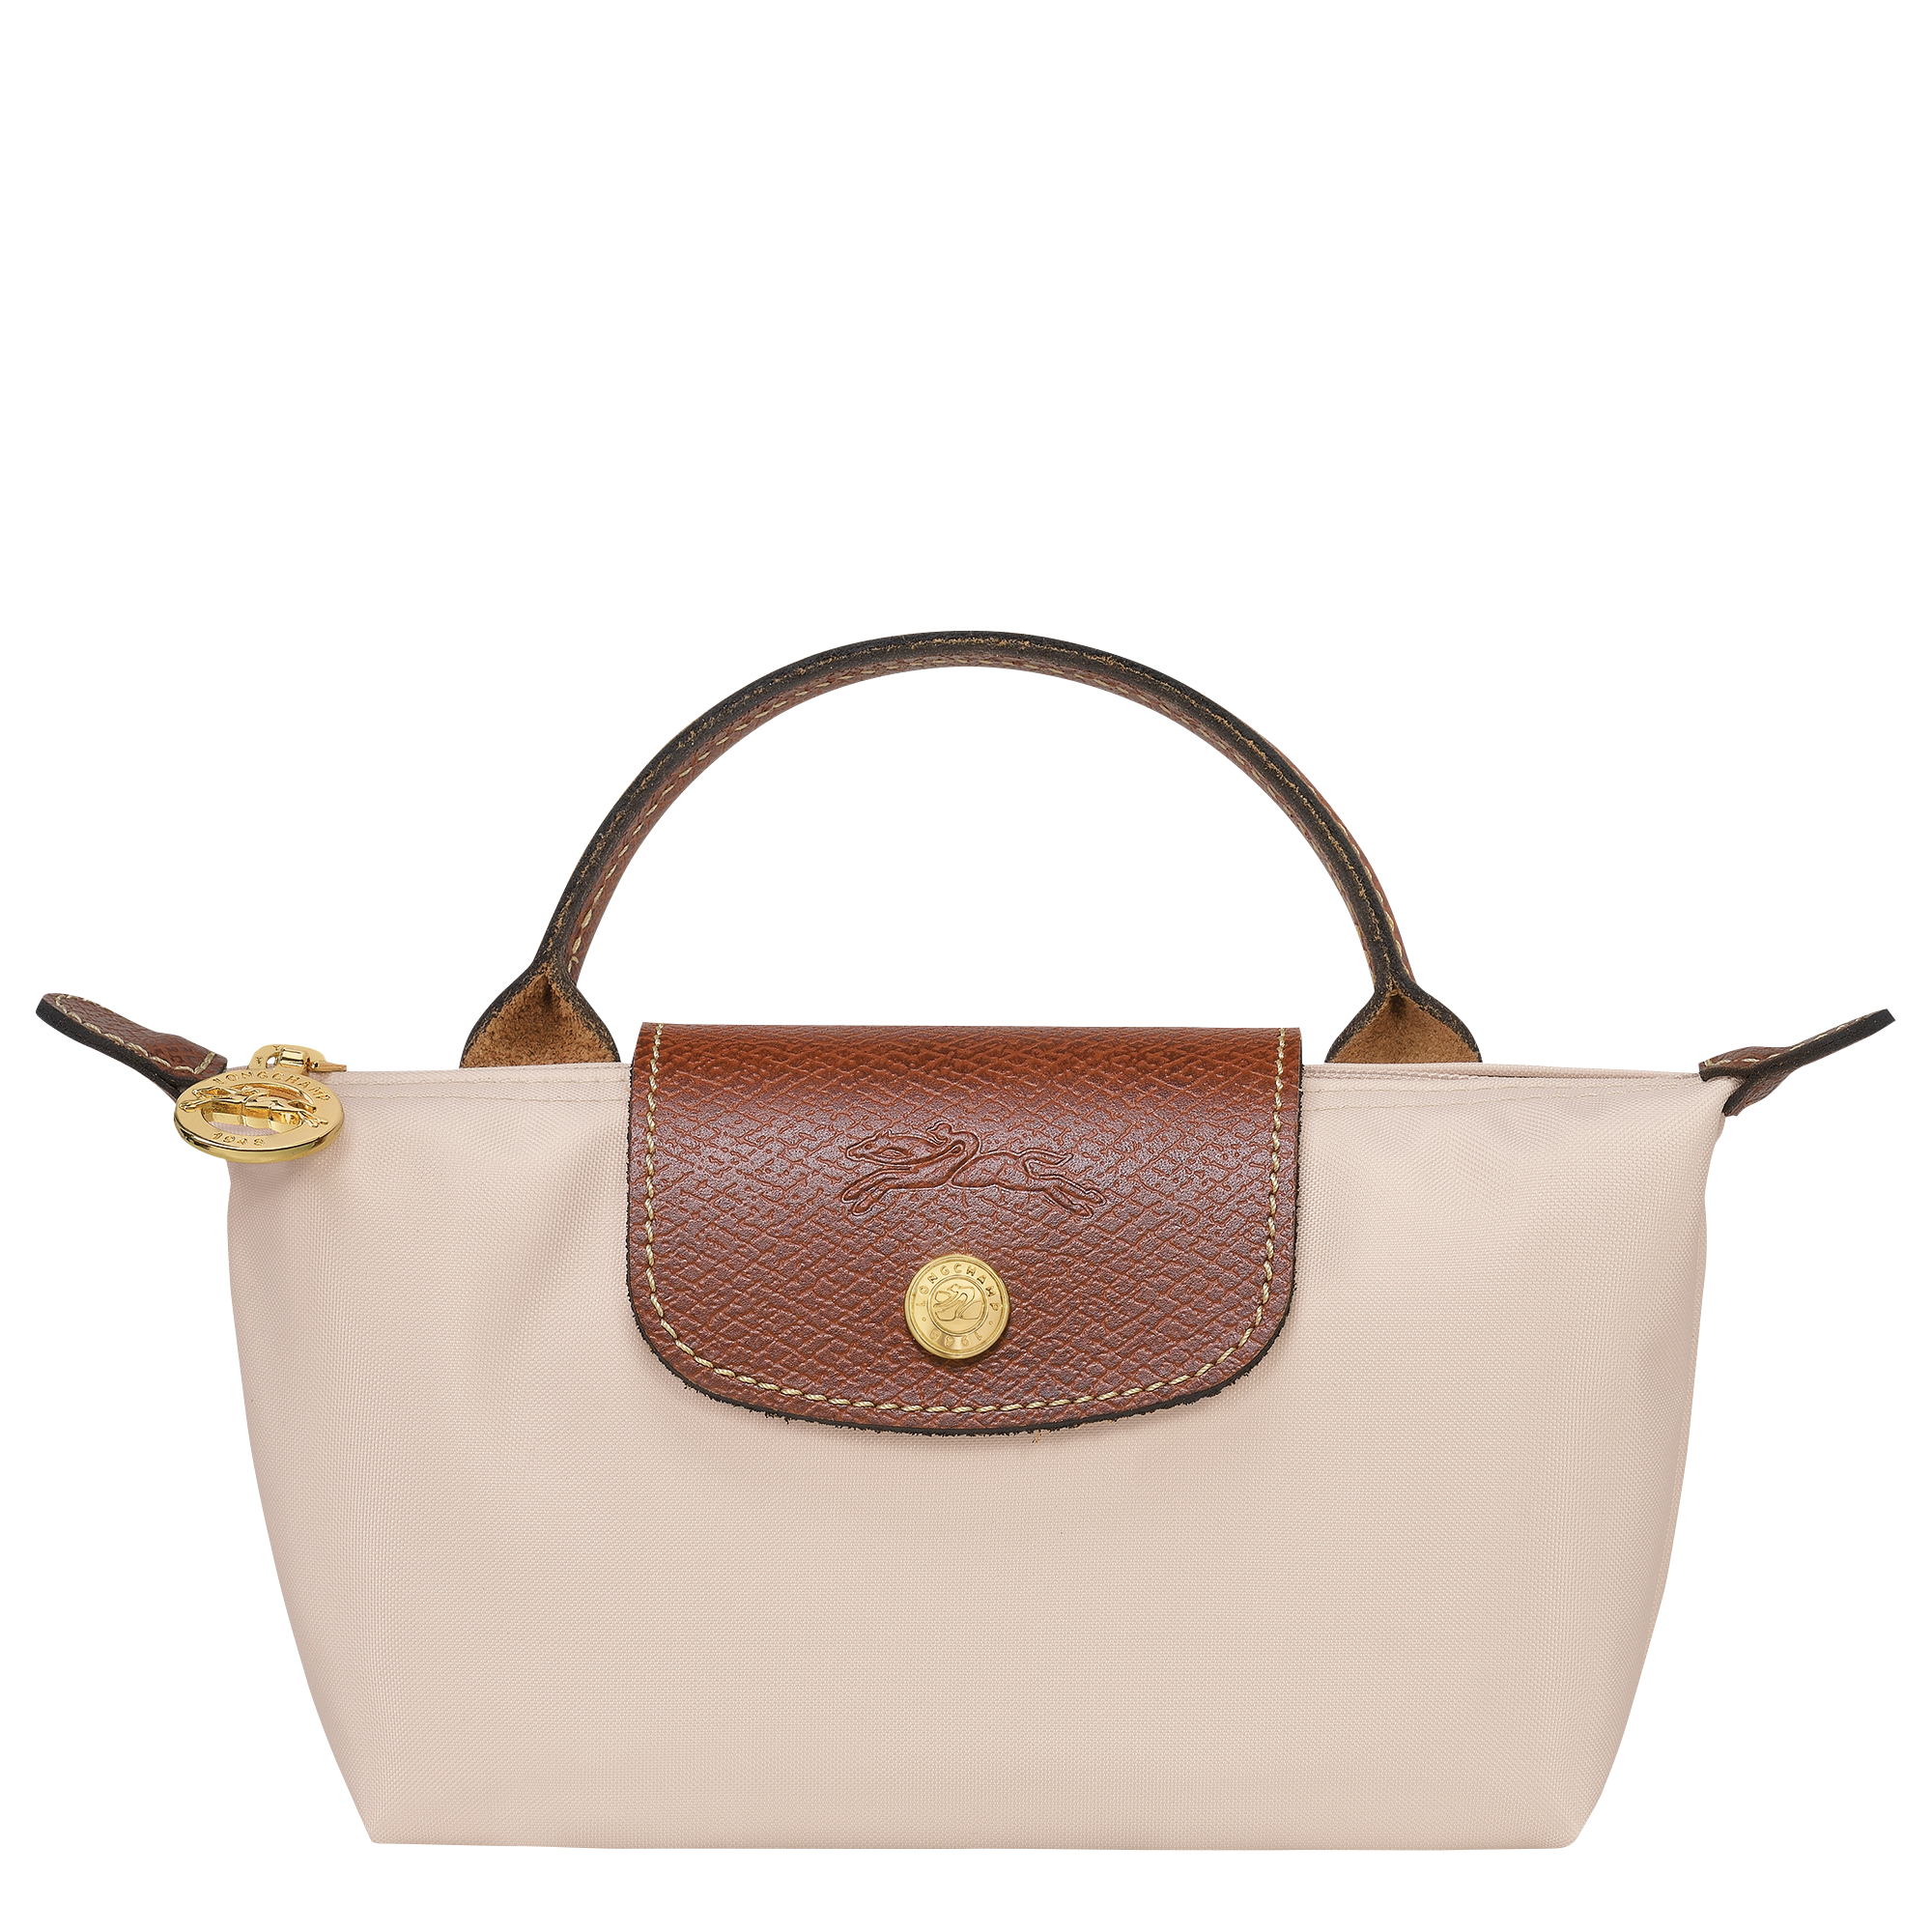 Nordstrom Anniversary Sale 2021: Get a Longchamp bag for a great price